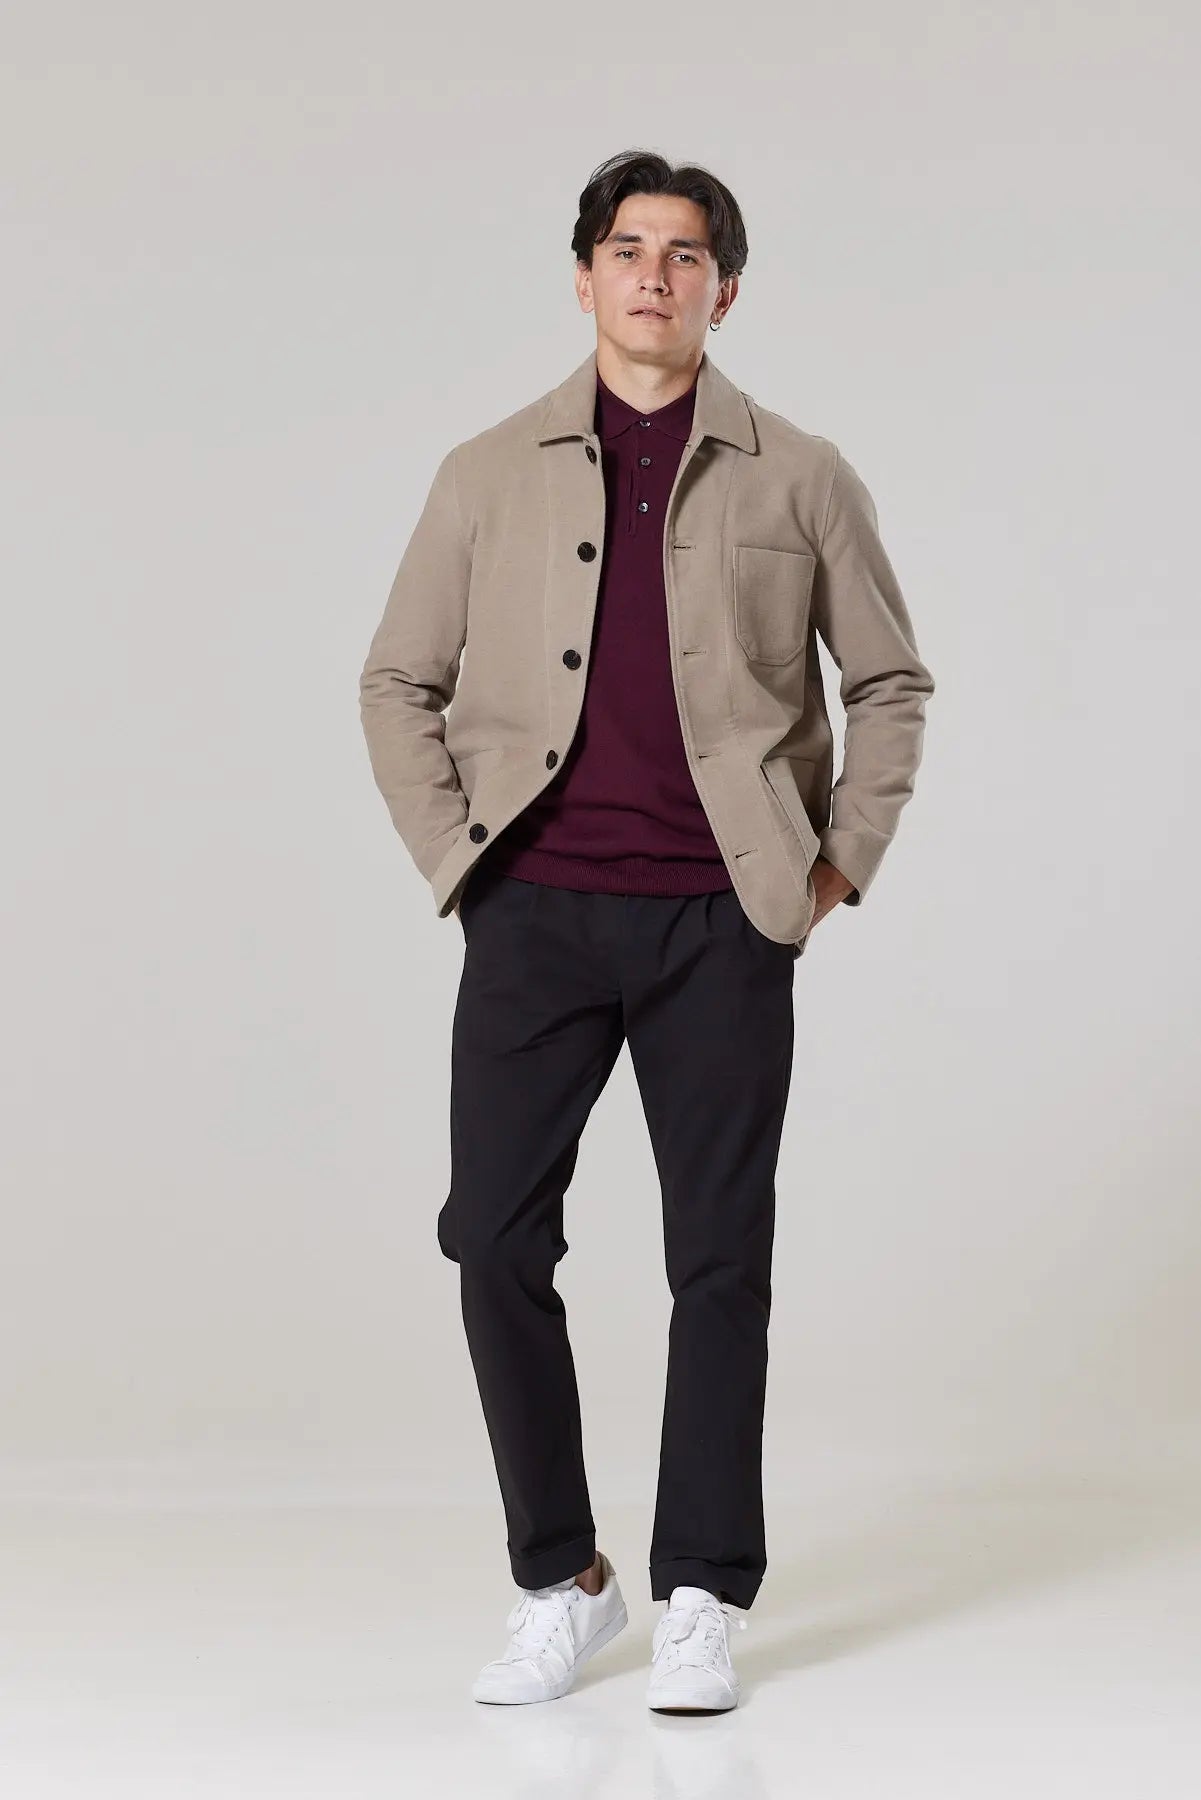 Commercial Casual Shacket - Beige Moleskin for Stylish Outerwear